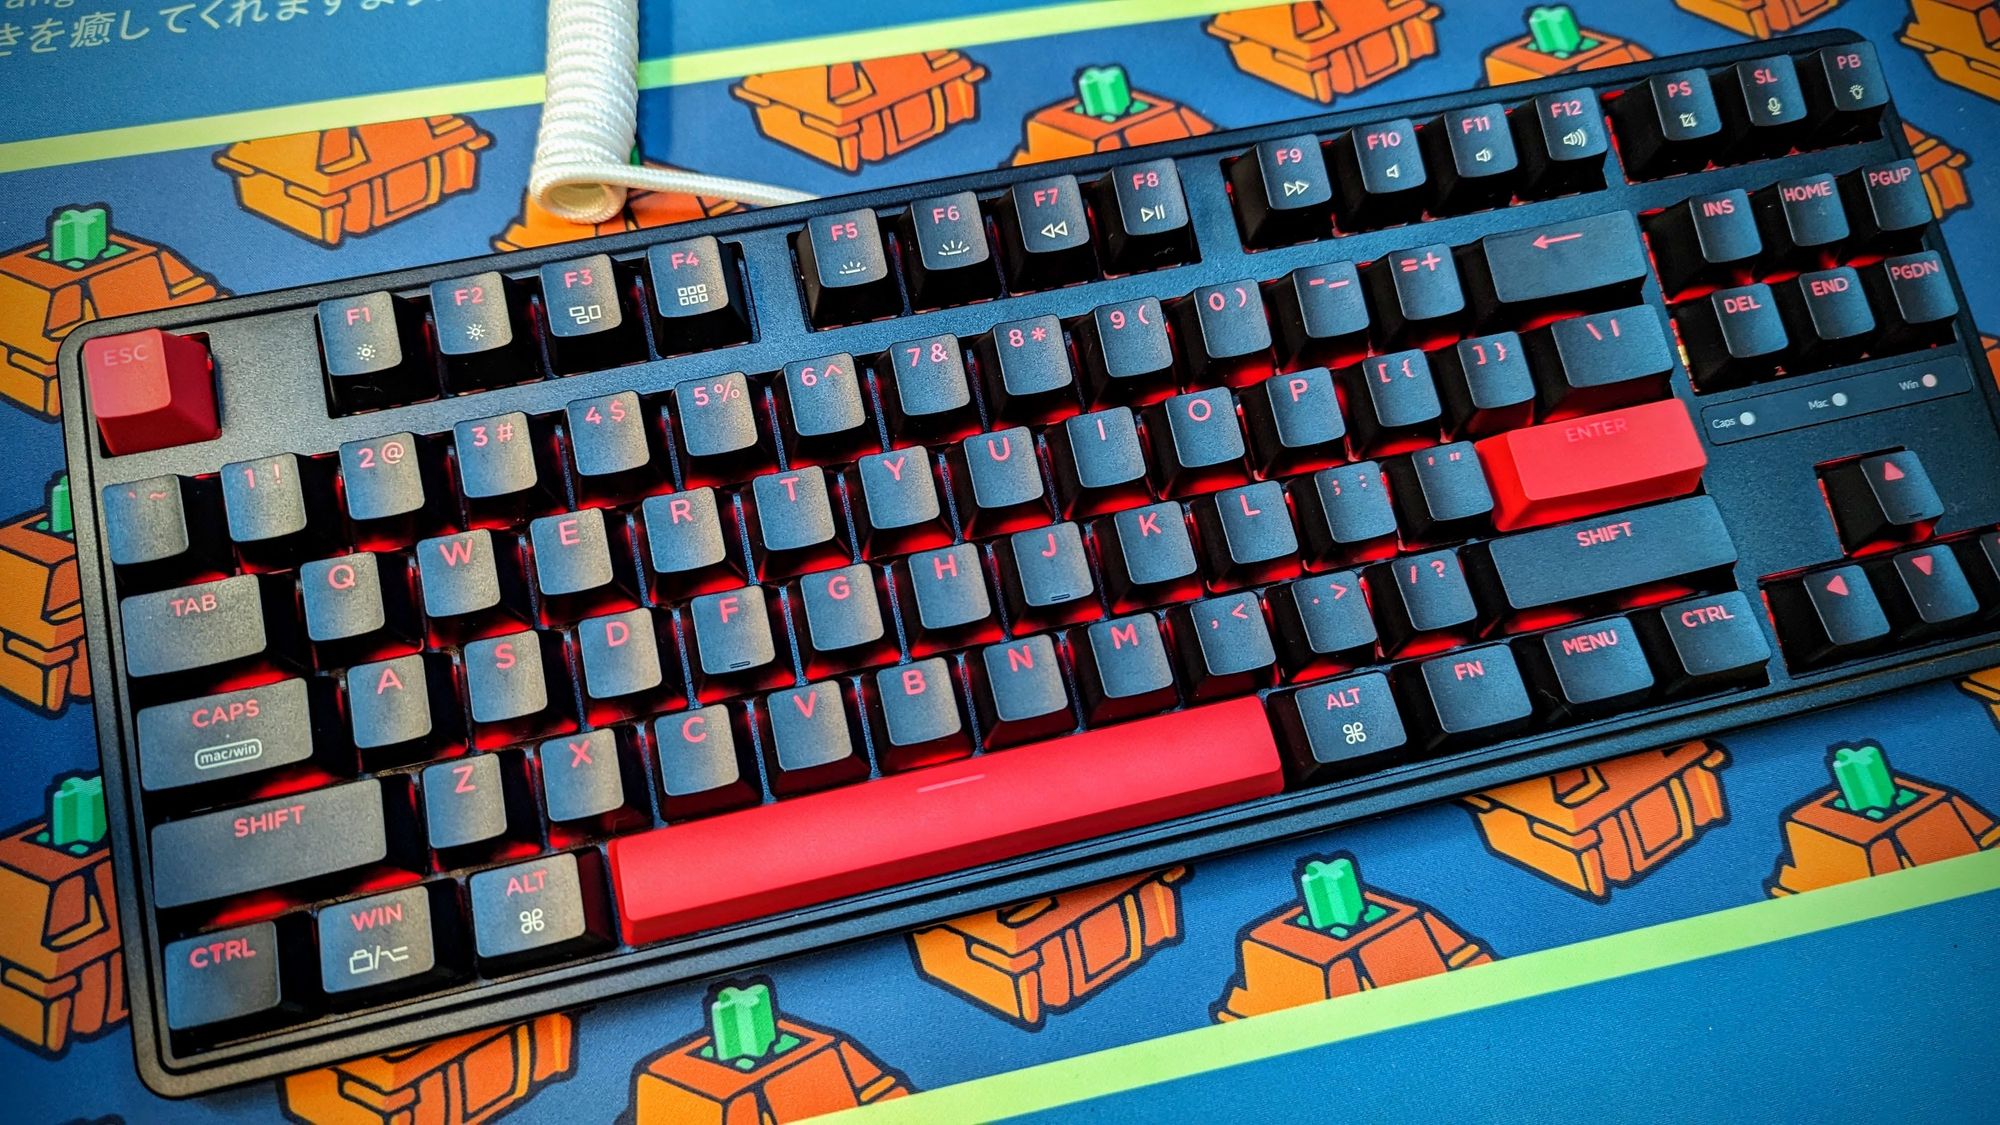 The New Budget King? Keychron C3 Pro: Gasket Mounted Wired Prebuilt QMK TKL for $35